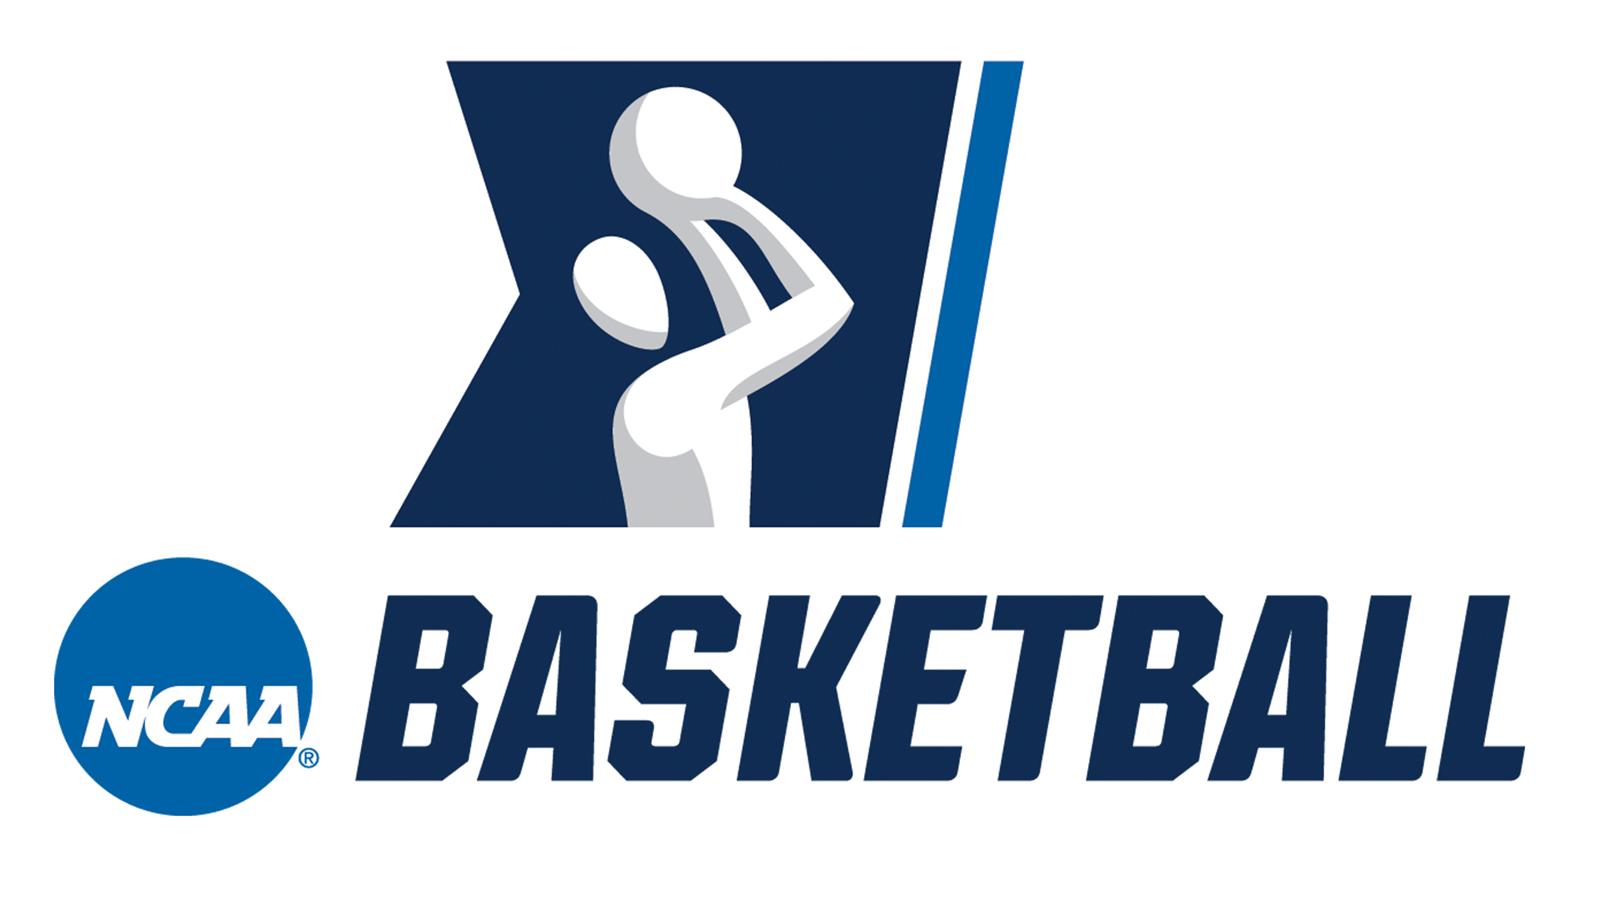 NCAA Men's Basketball Tournament: Rounds 1 & 2 - Session 1 at Amway Center